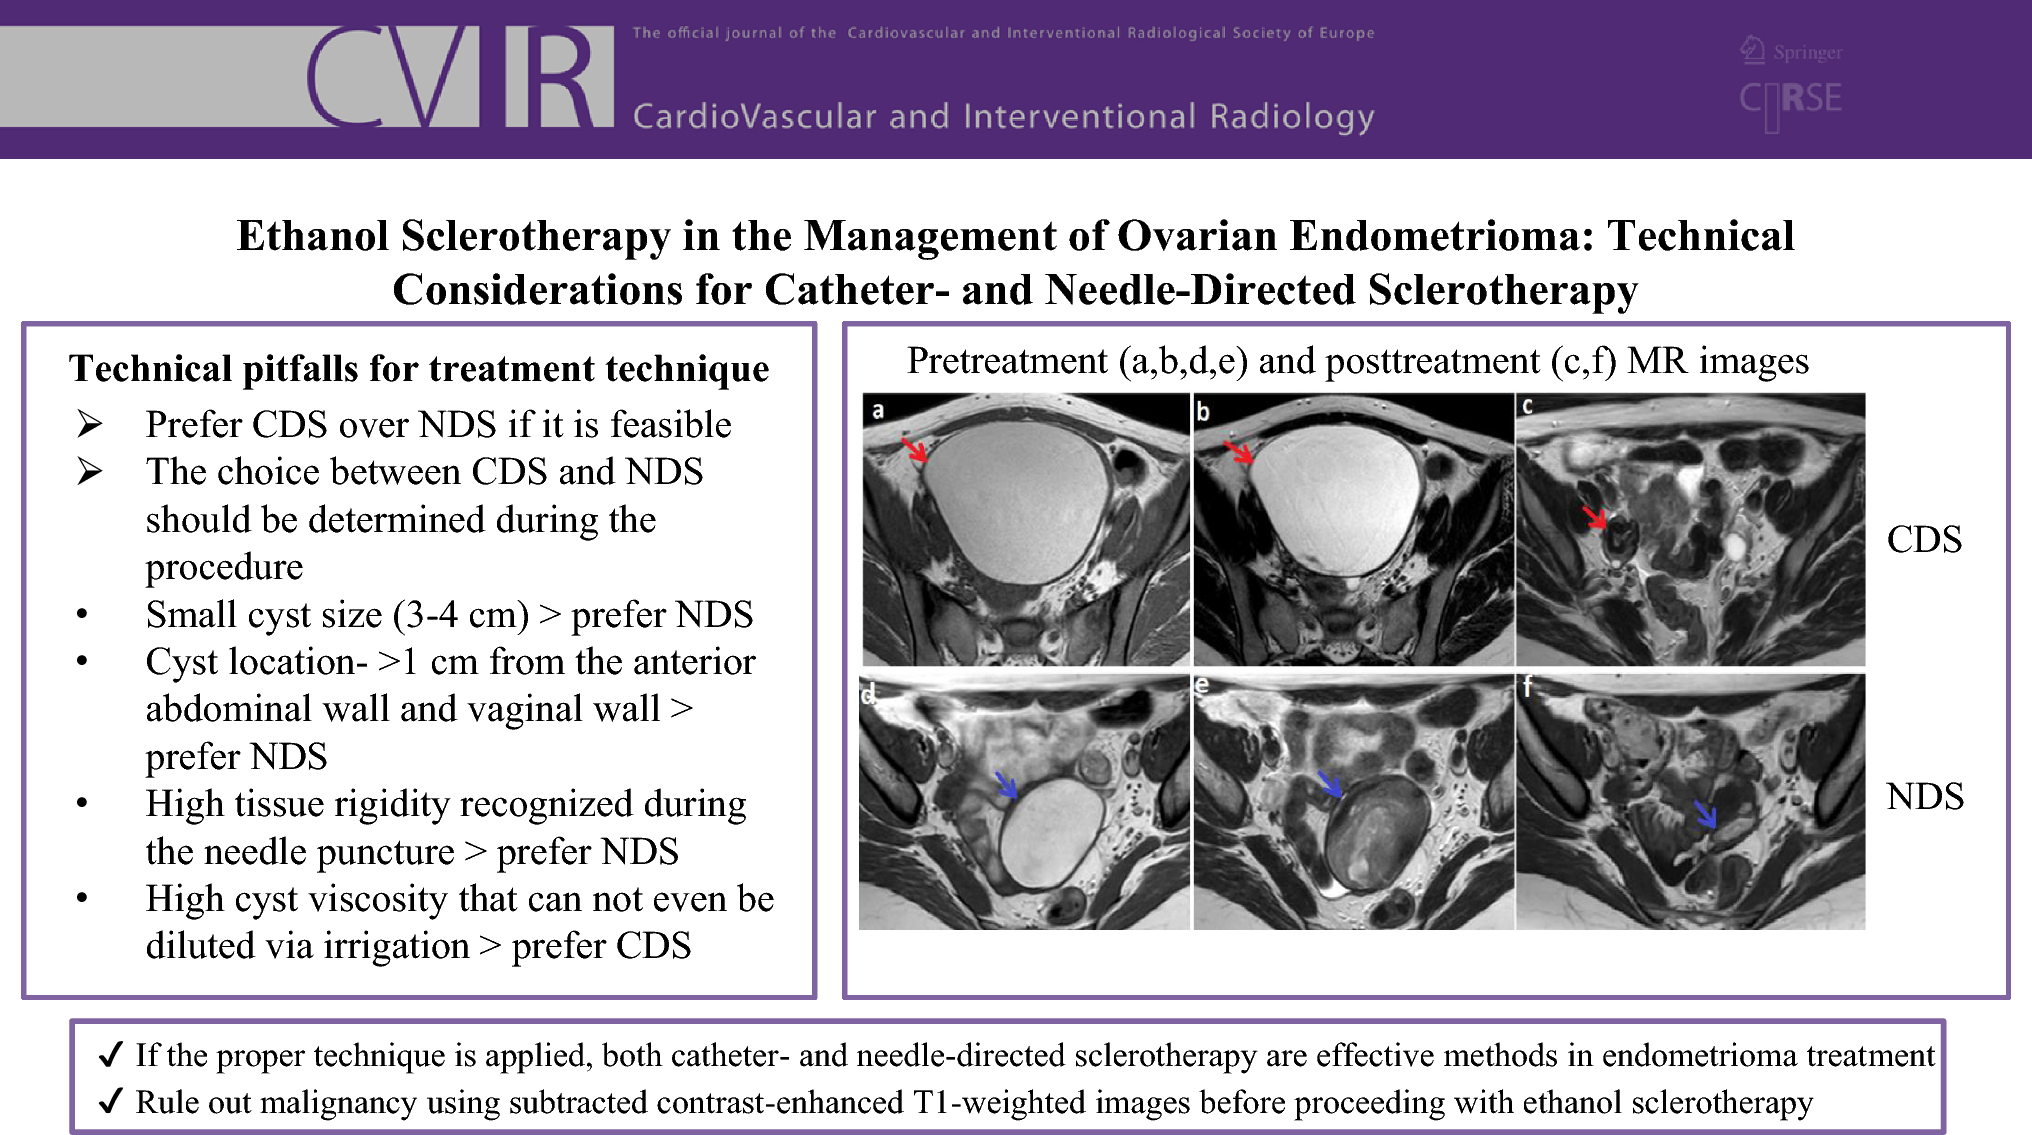 Ethanol Sclerotherapy in the Management of Ovarian Endometrioma: Technical Considerations for Catheter- and Needle-Directed Sclerotherapy